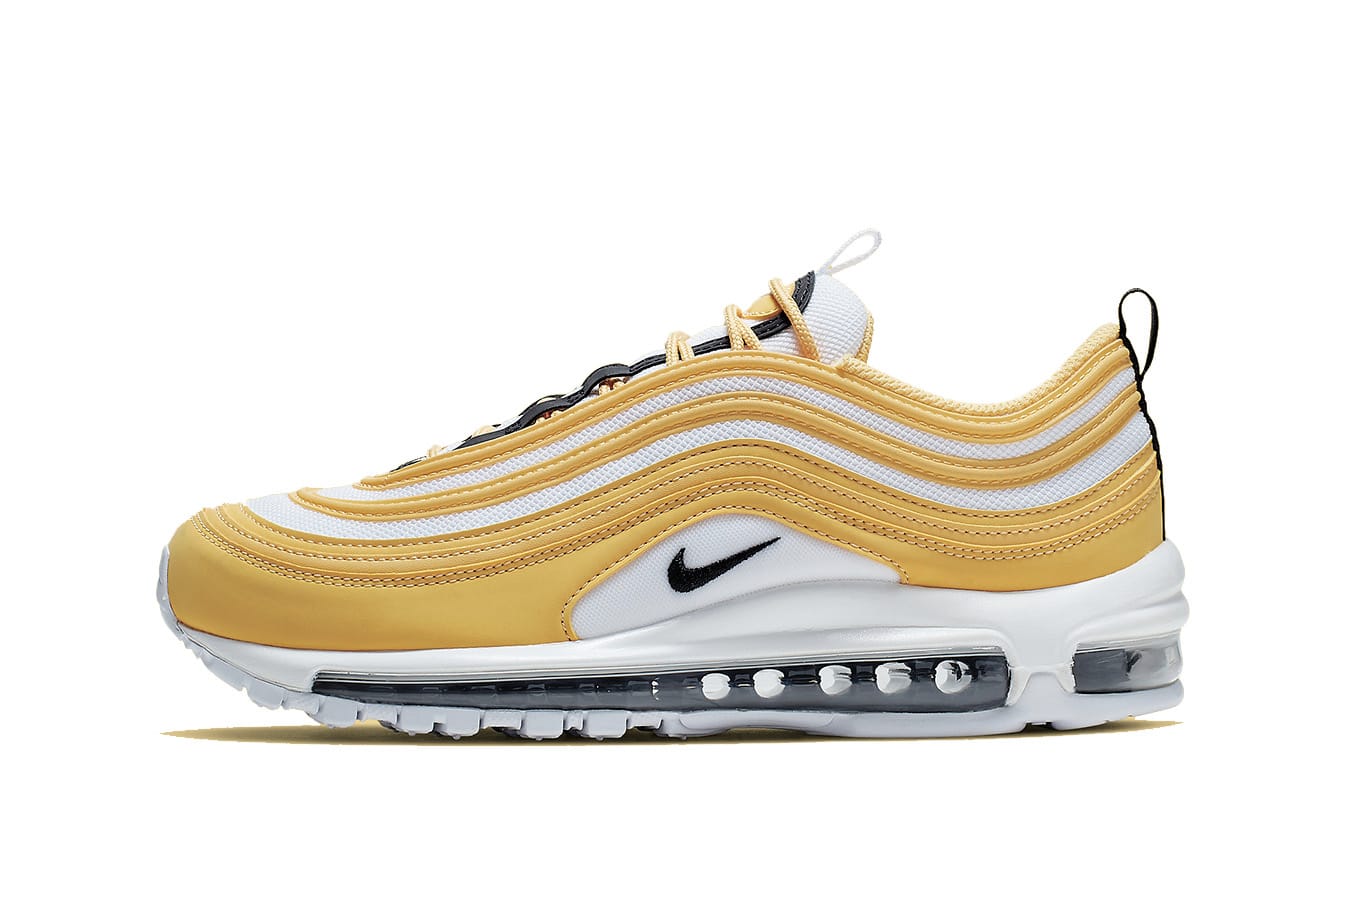 Nike's Air Max 97 Arrives in Yellow 